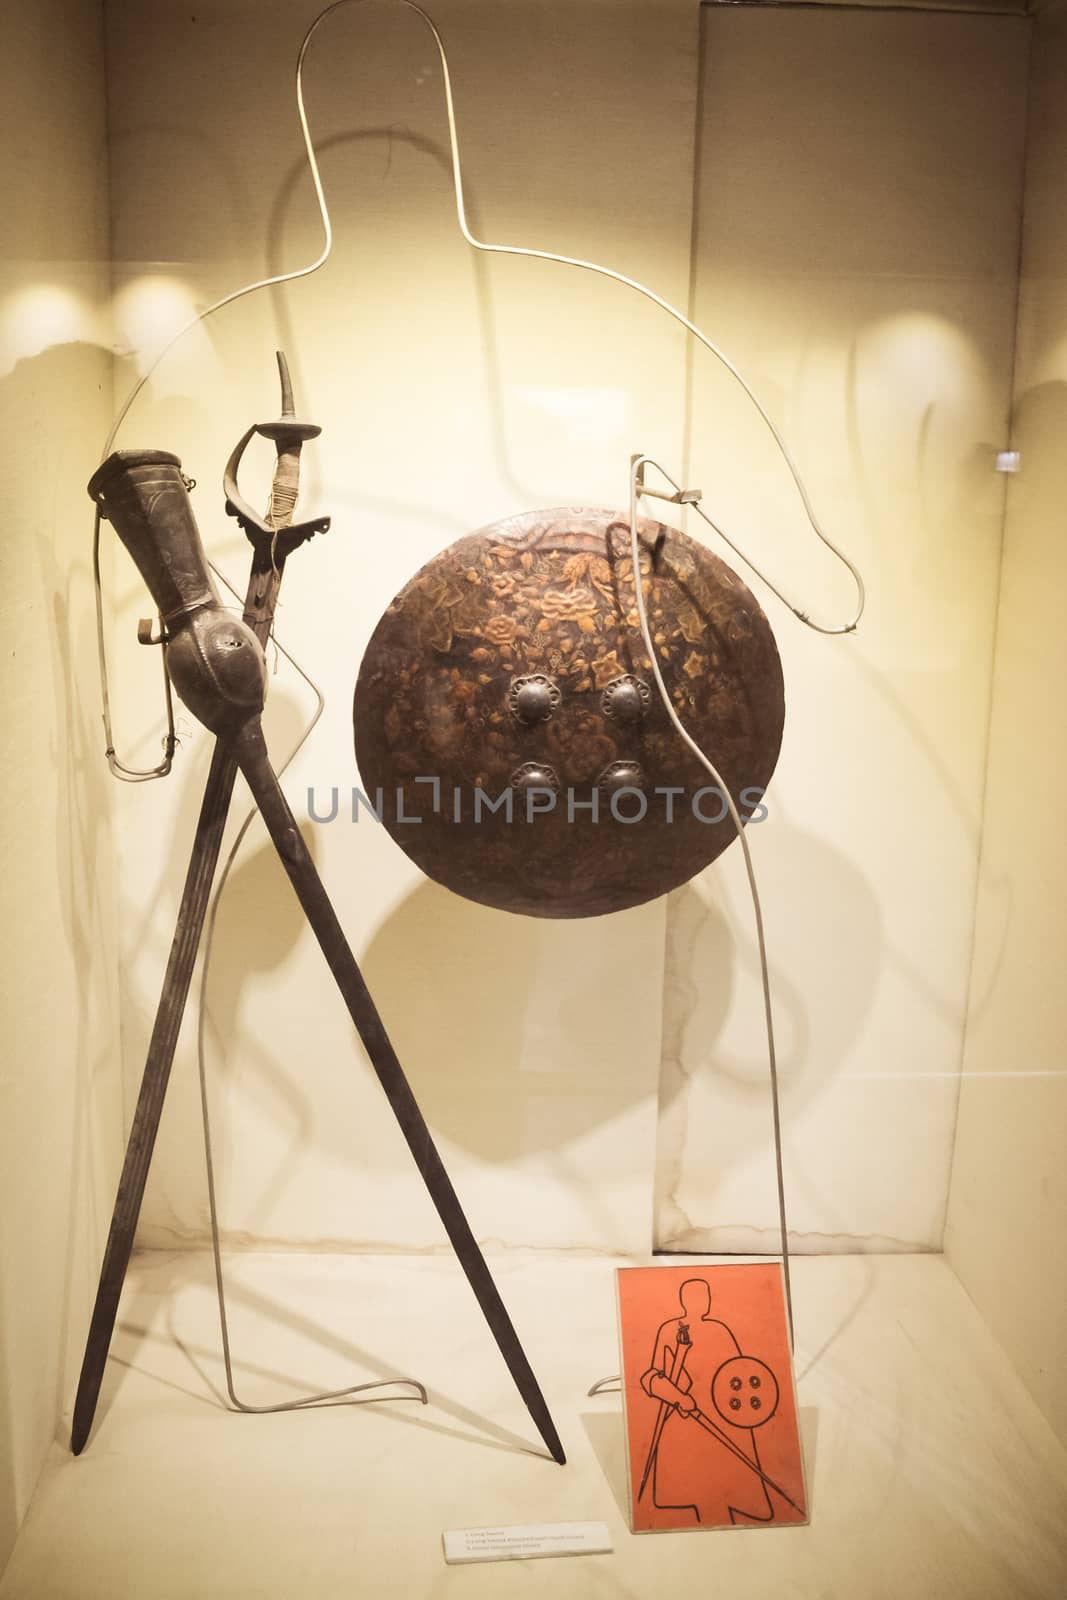 Red Fort Museum of Arms and Weapons, New Delhi, Jul 21, 2018: Arms and Weapons Showcased here in Galleries includes Arrows, Swords, Revolvers, Machine Guns, Shells, Daggers Ivory and Battle Axes. by sudiptabhowmick